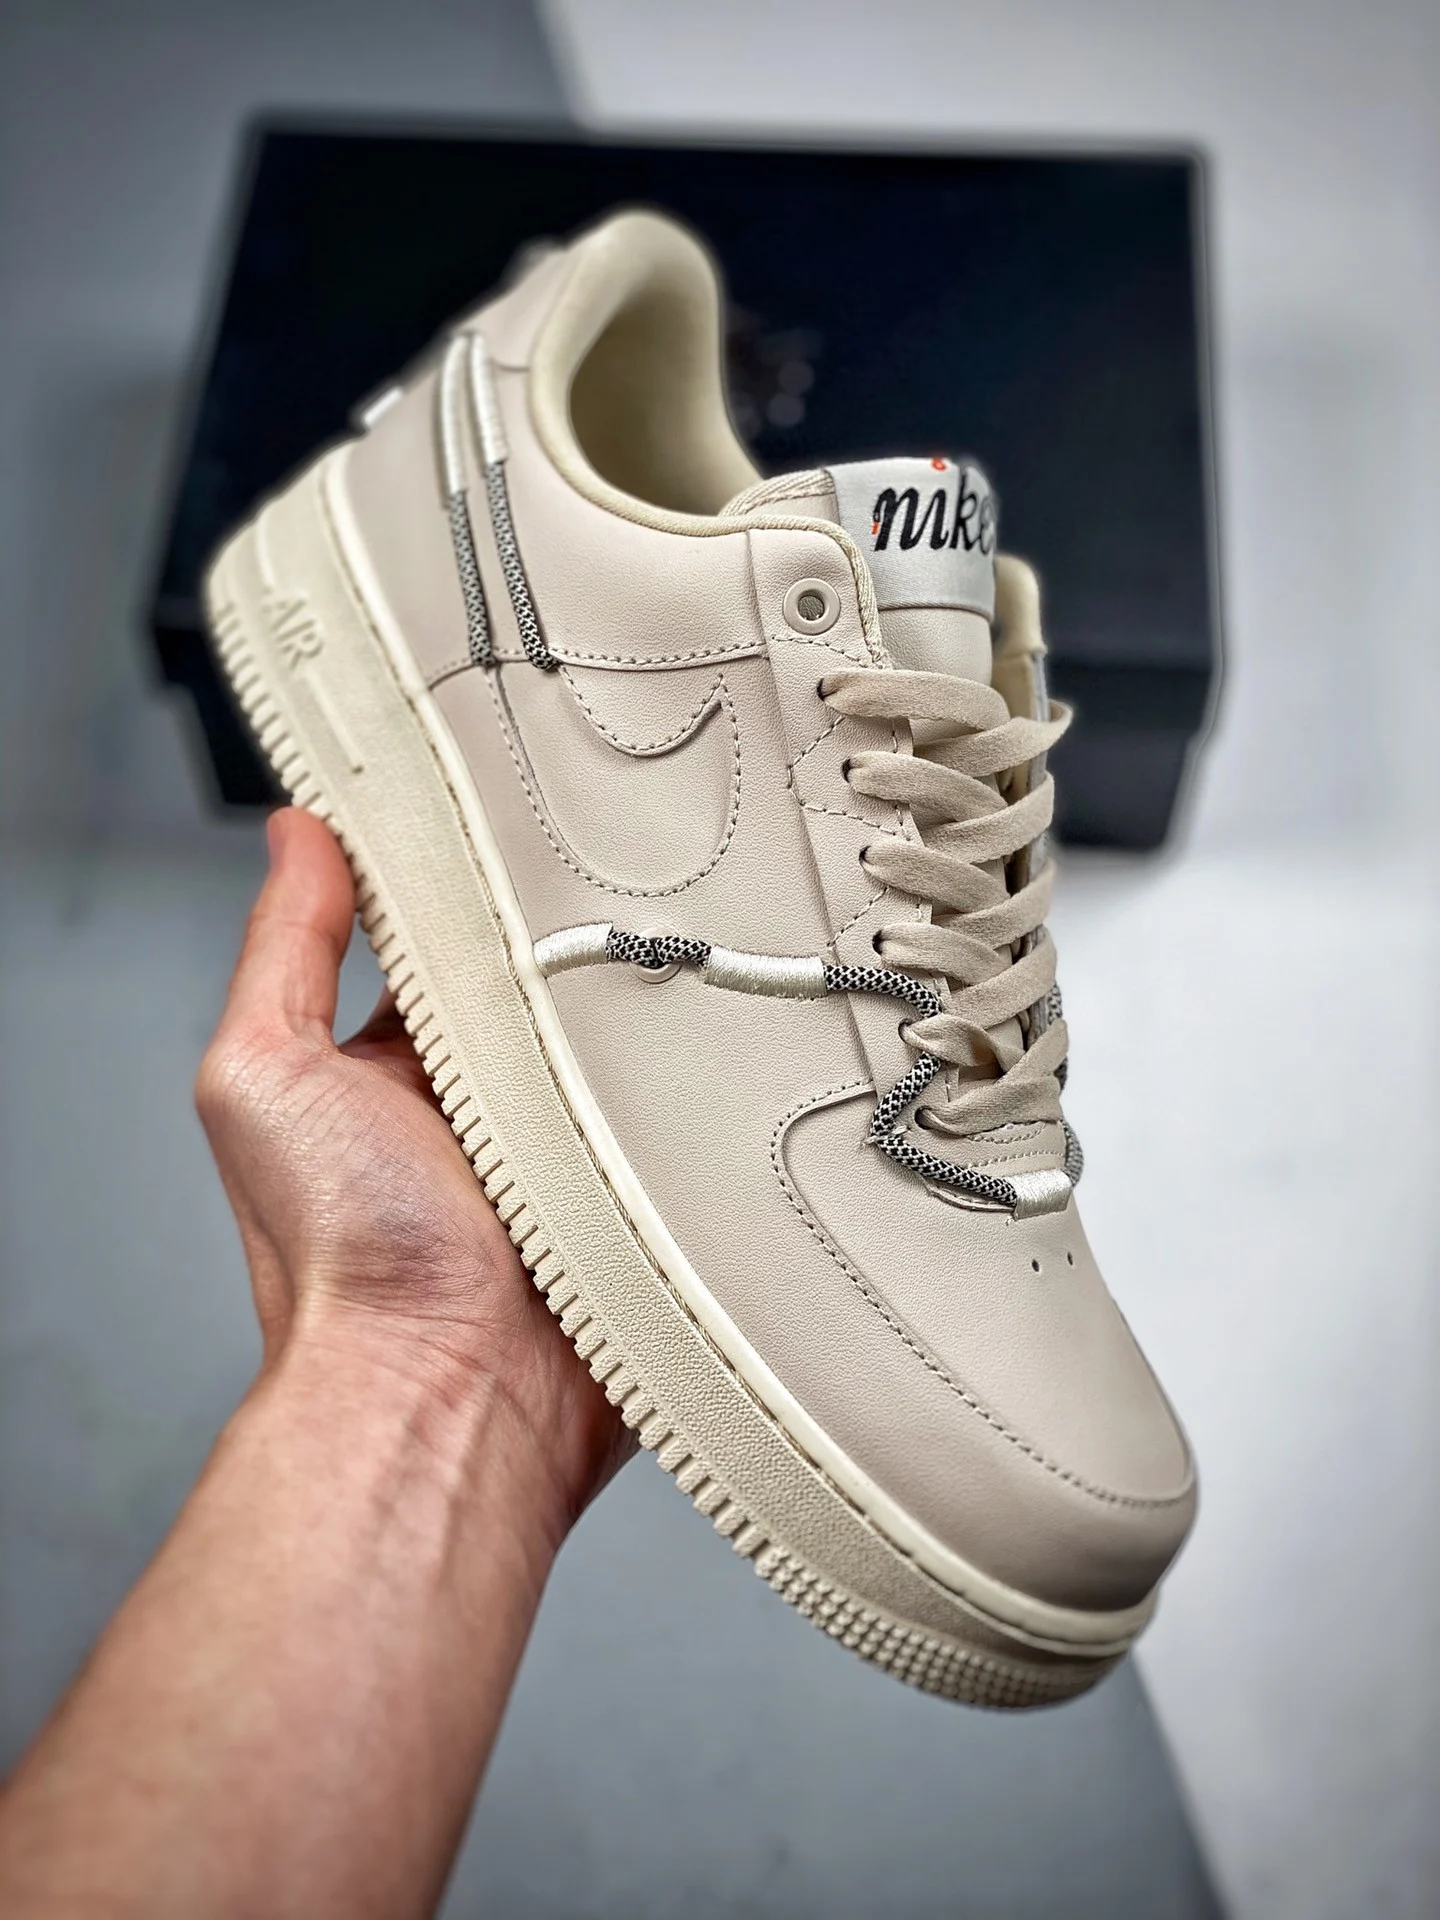 Nike Air Force 1 Low LX Light Orewood Brown DH4408-102 For Sale